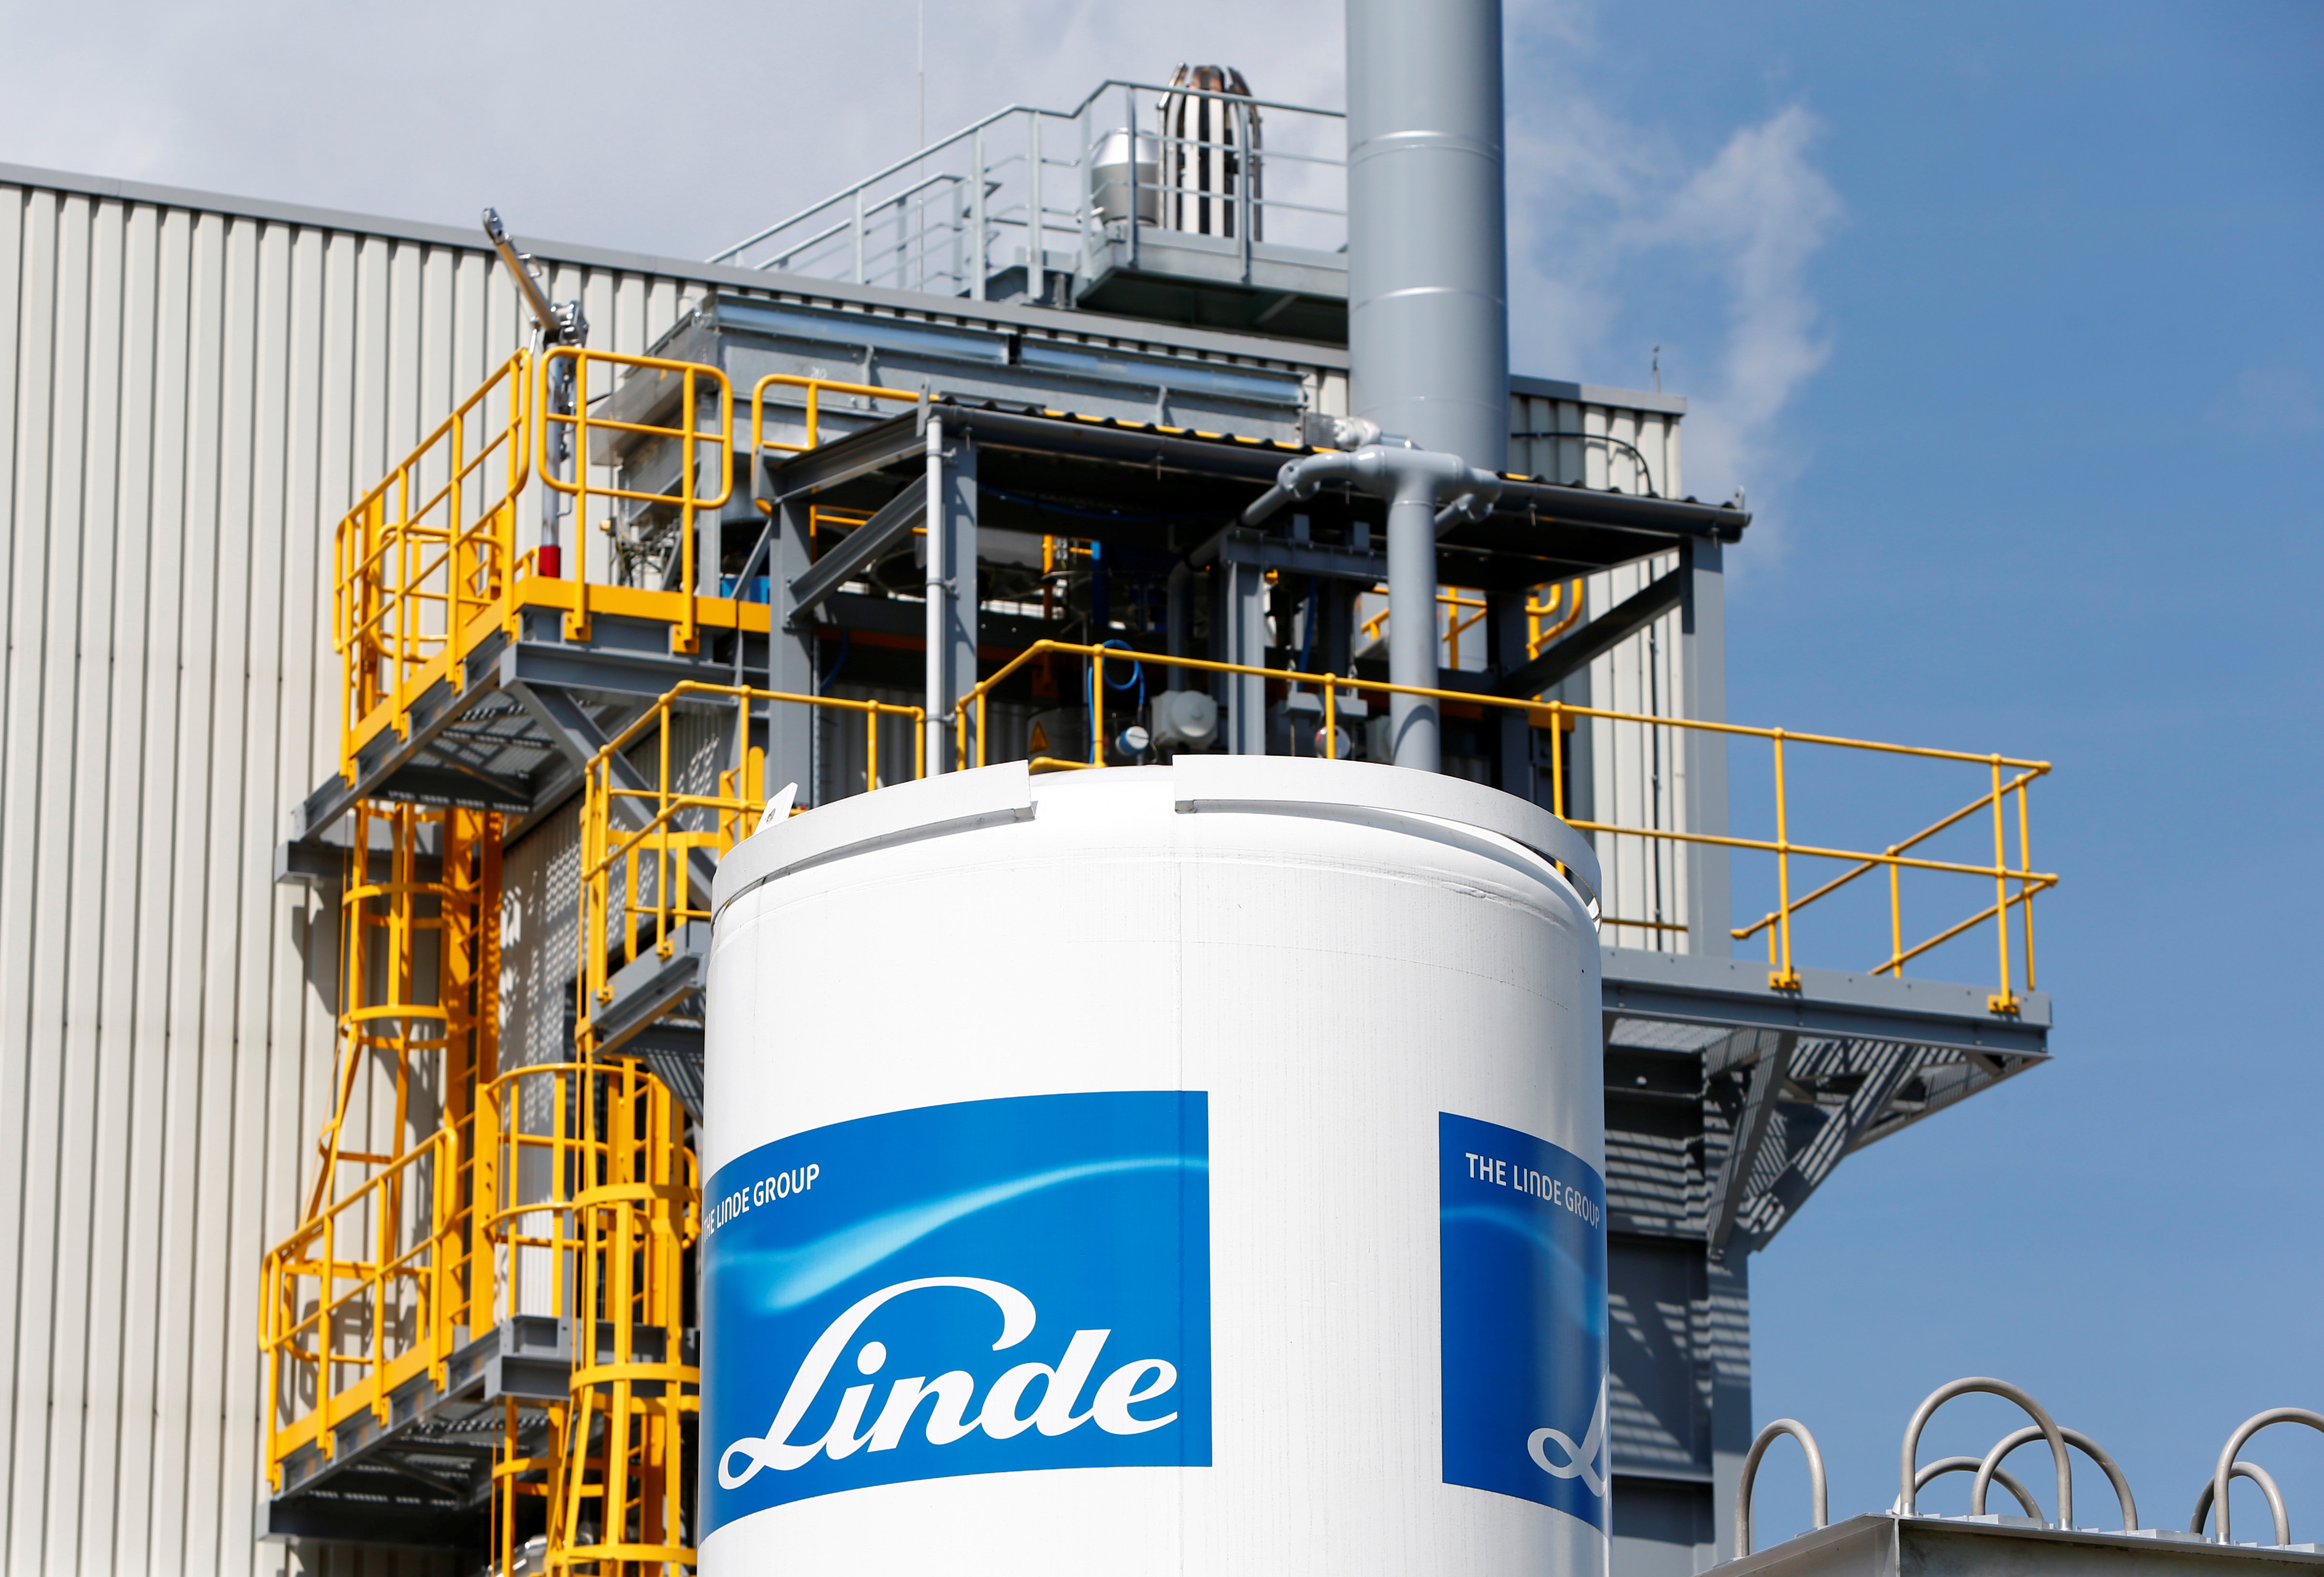 Linde Group logo is seen at company building in Munich